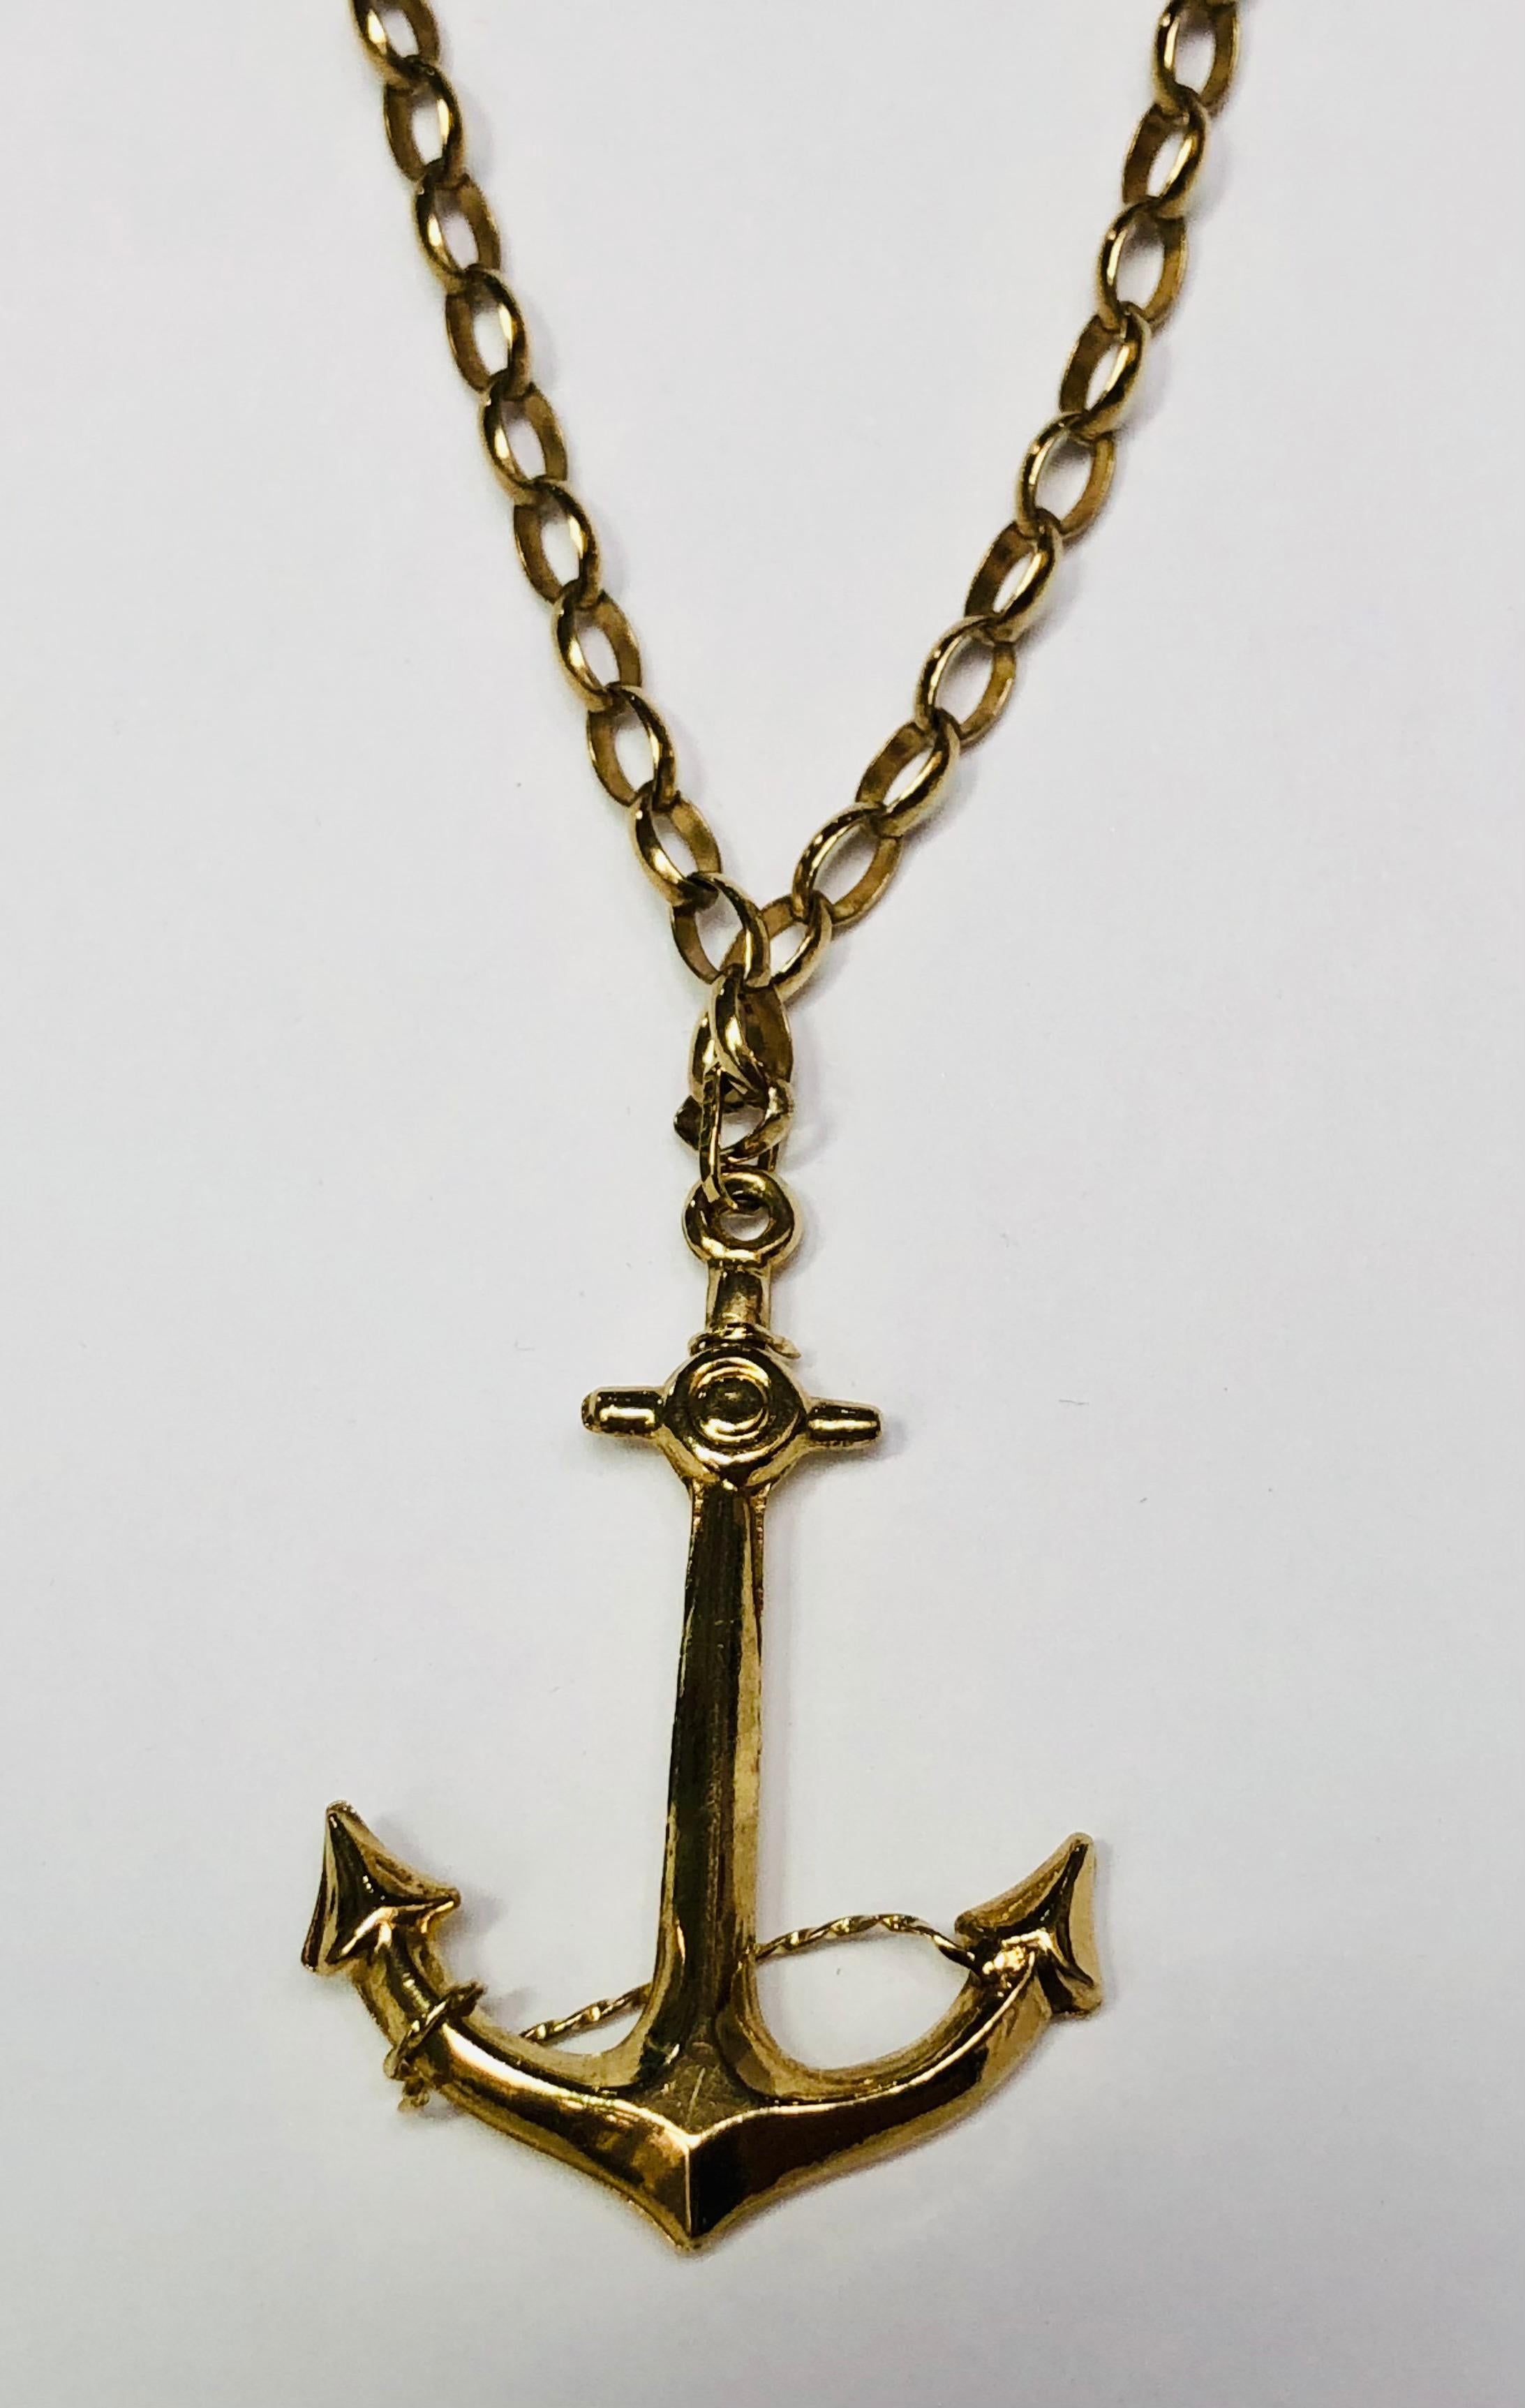 A vintage gold Anchor pendant and belcher chain stamped with the anchor mark for Birmingham, England. A lovely summer jewel for sailors or boating types. Marked 375 for 9 karat gold. This long line necklace is 65cms with pendant length 4.5cms by